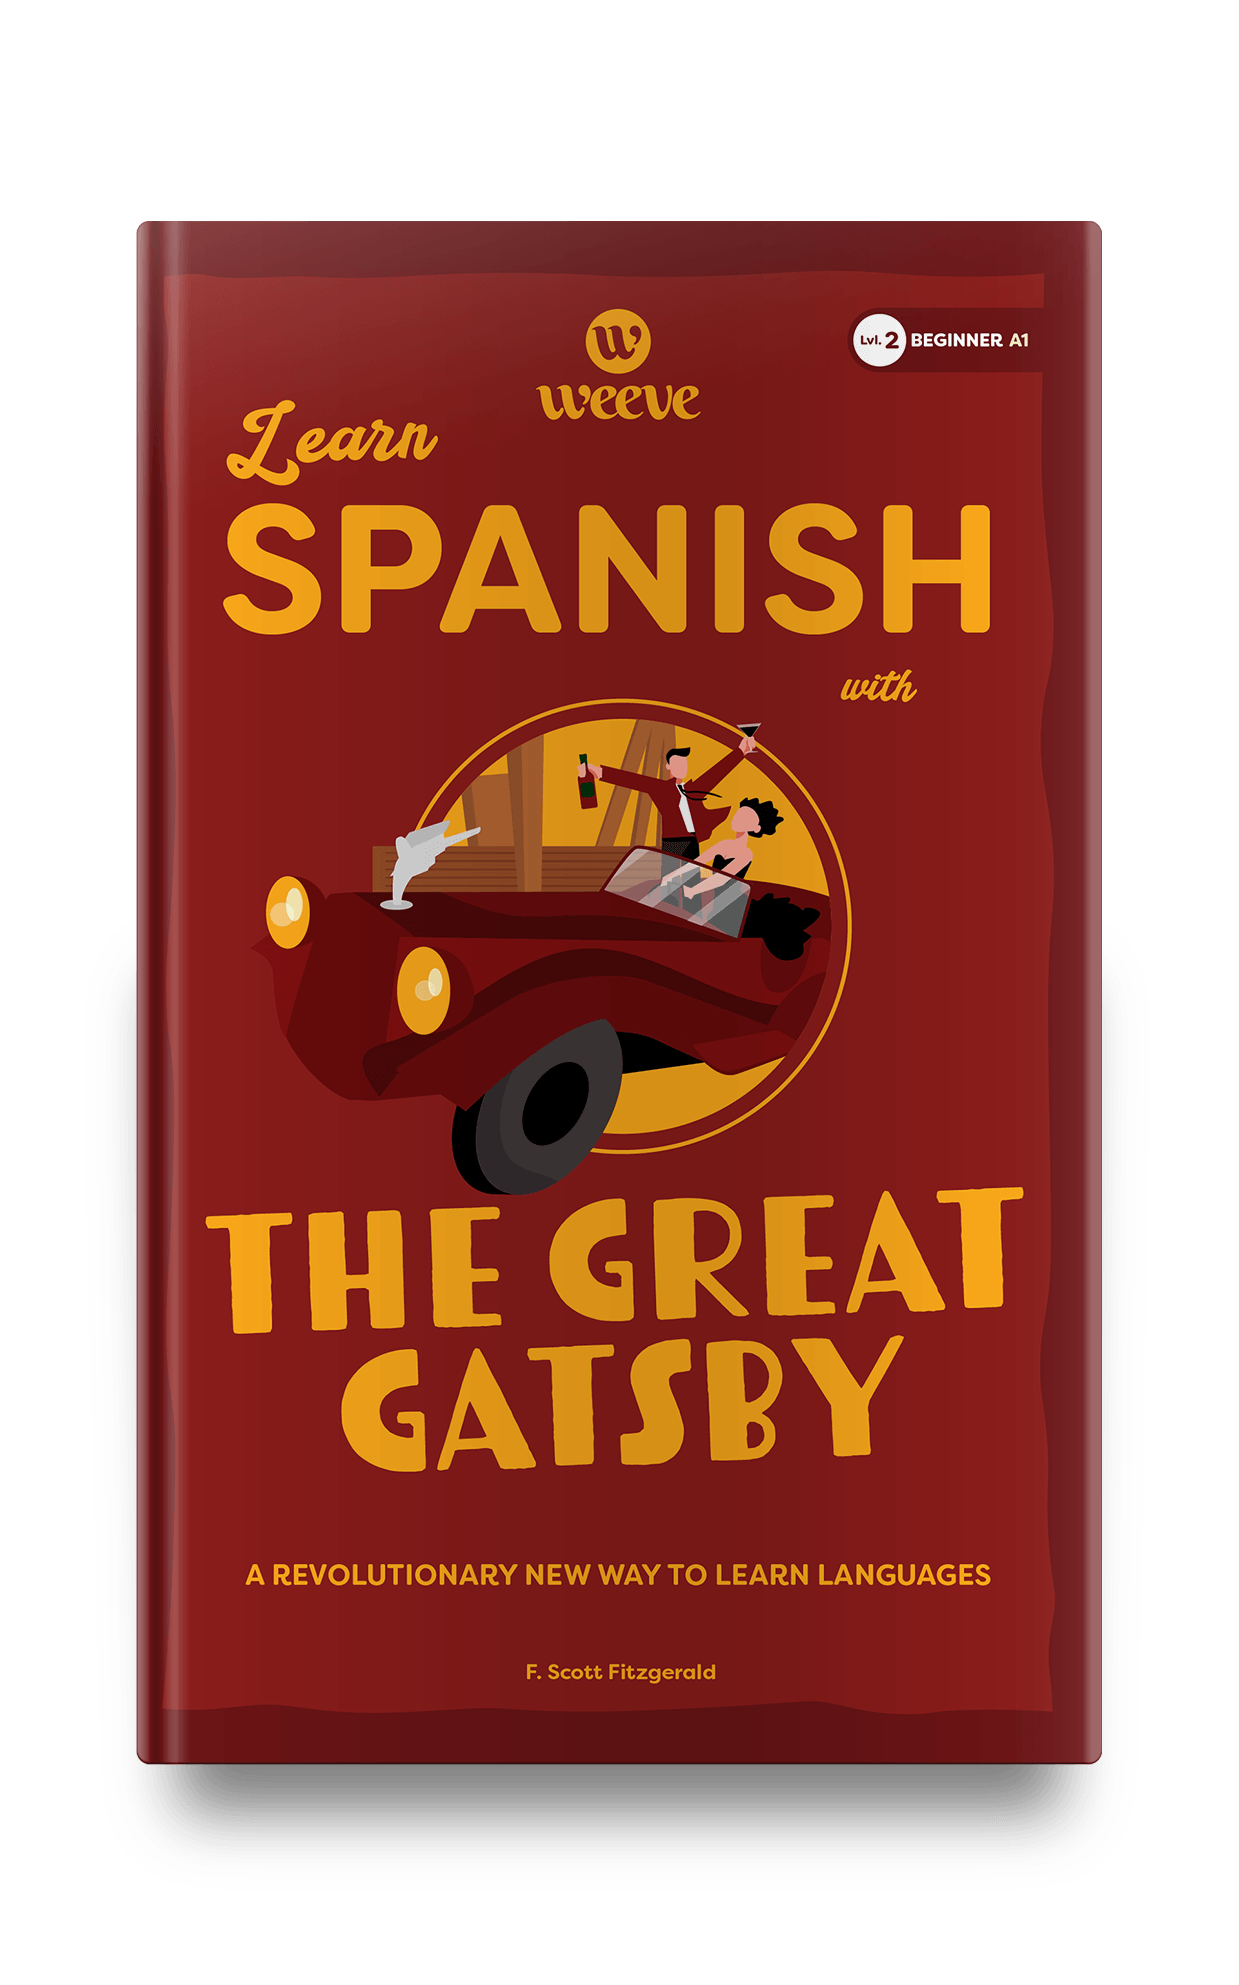 Learn Spanish with The Great Gatsby - Weeve